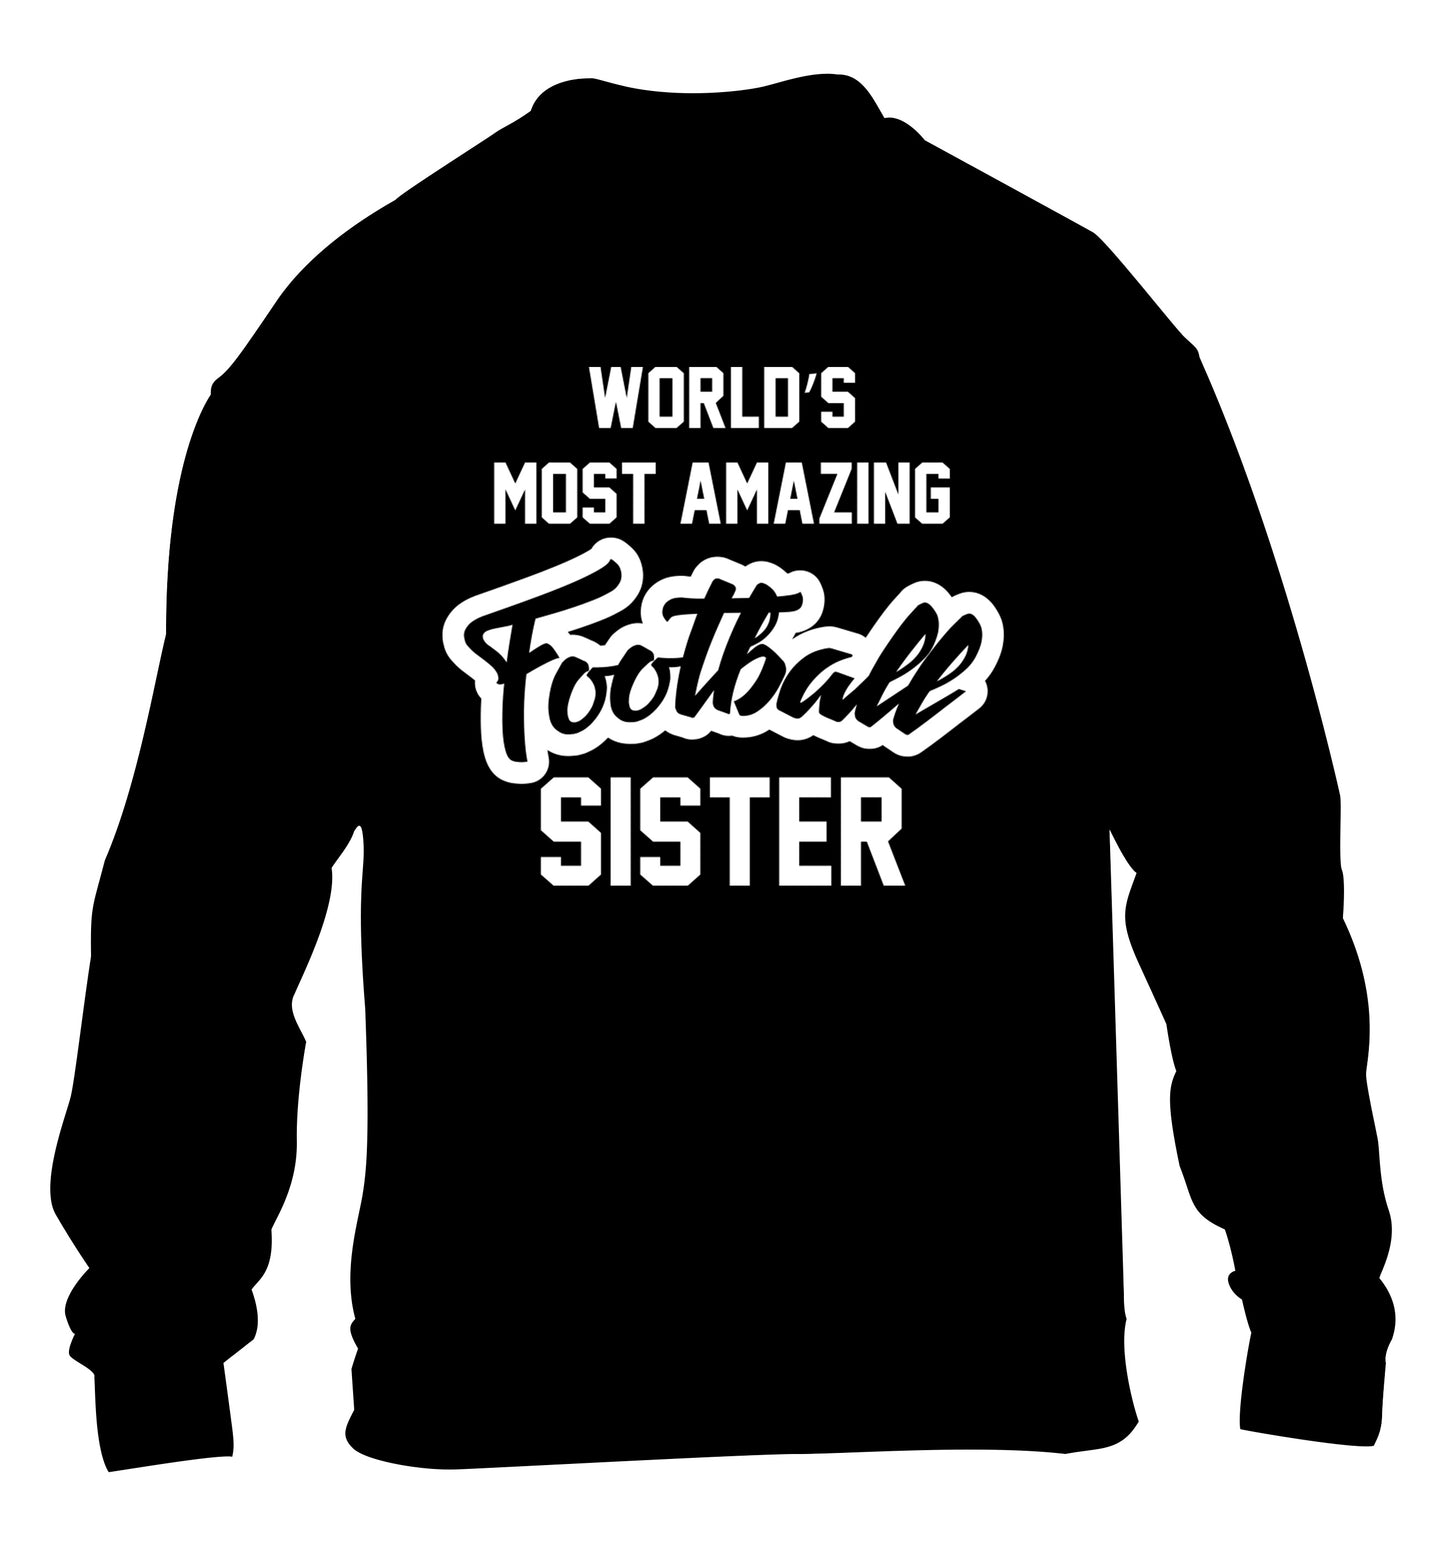 Worlds most amazing football sister children's black sweater 12-14 Years